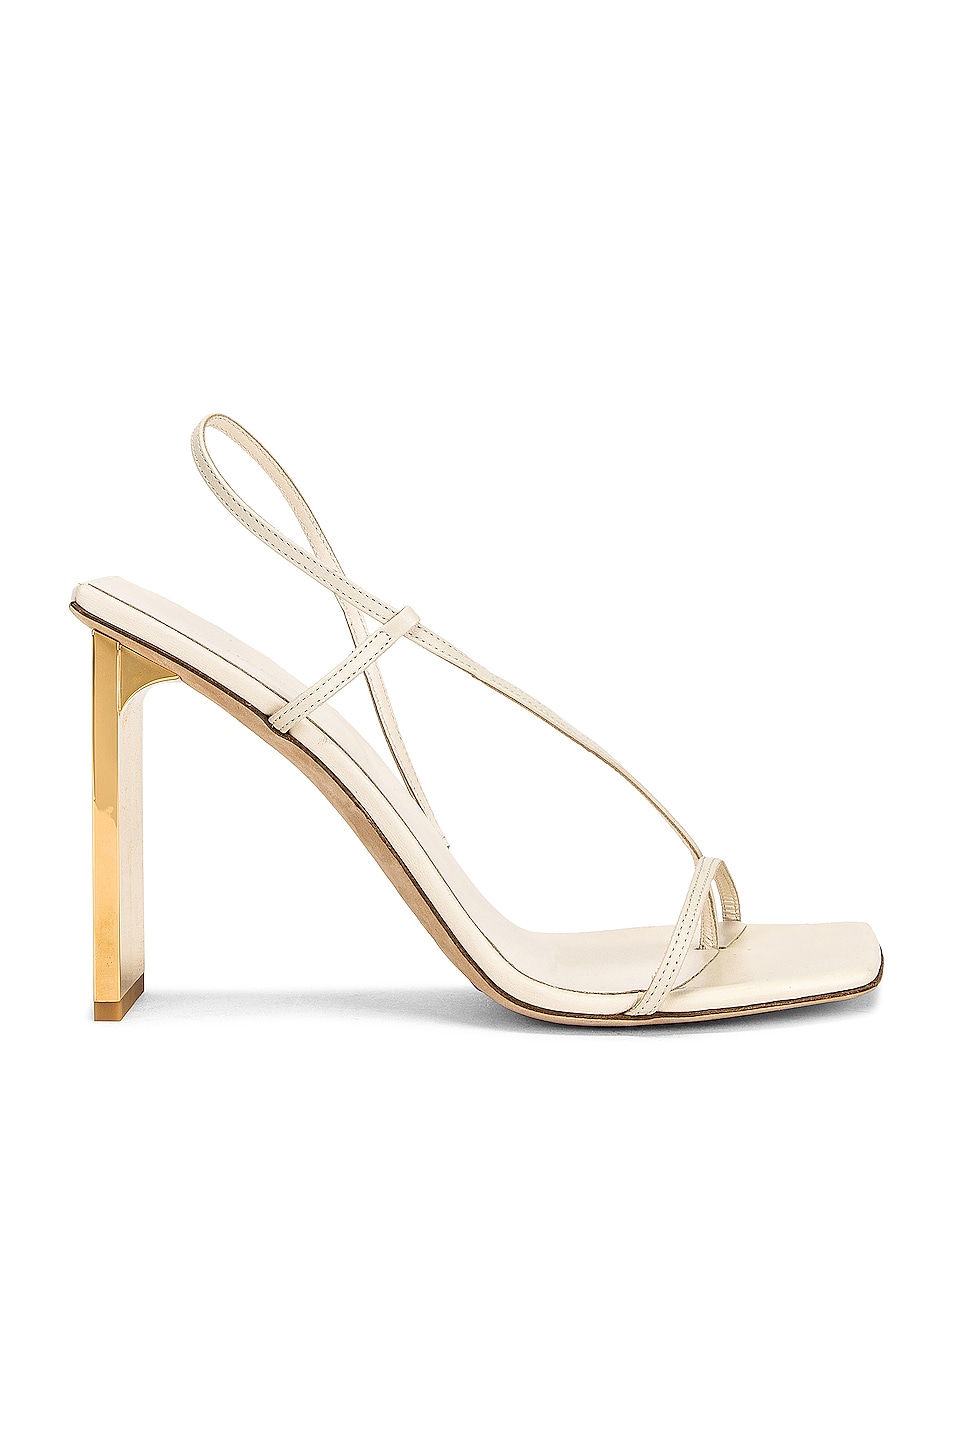 Image 1 of Arielle Baron Narcissus 95 Heel in Ivory